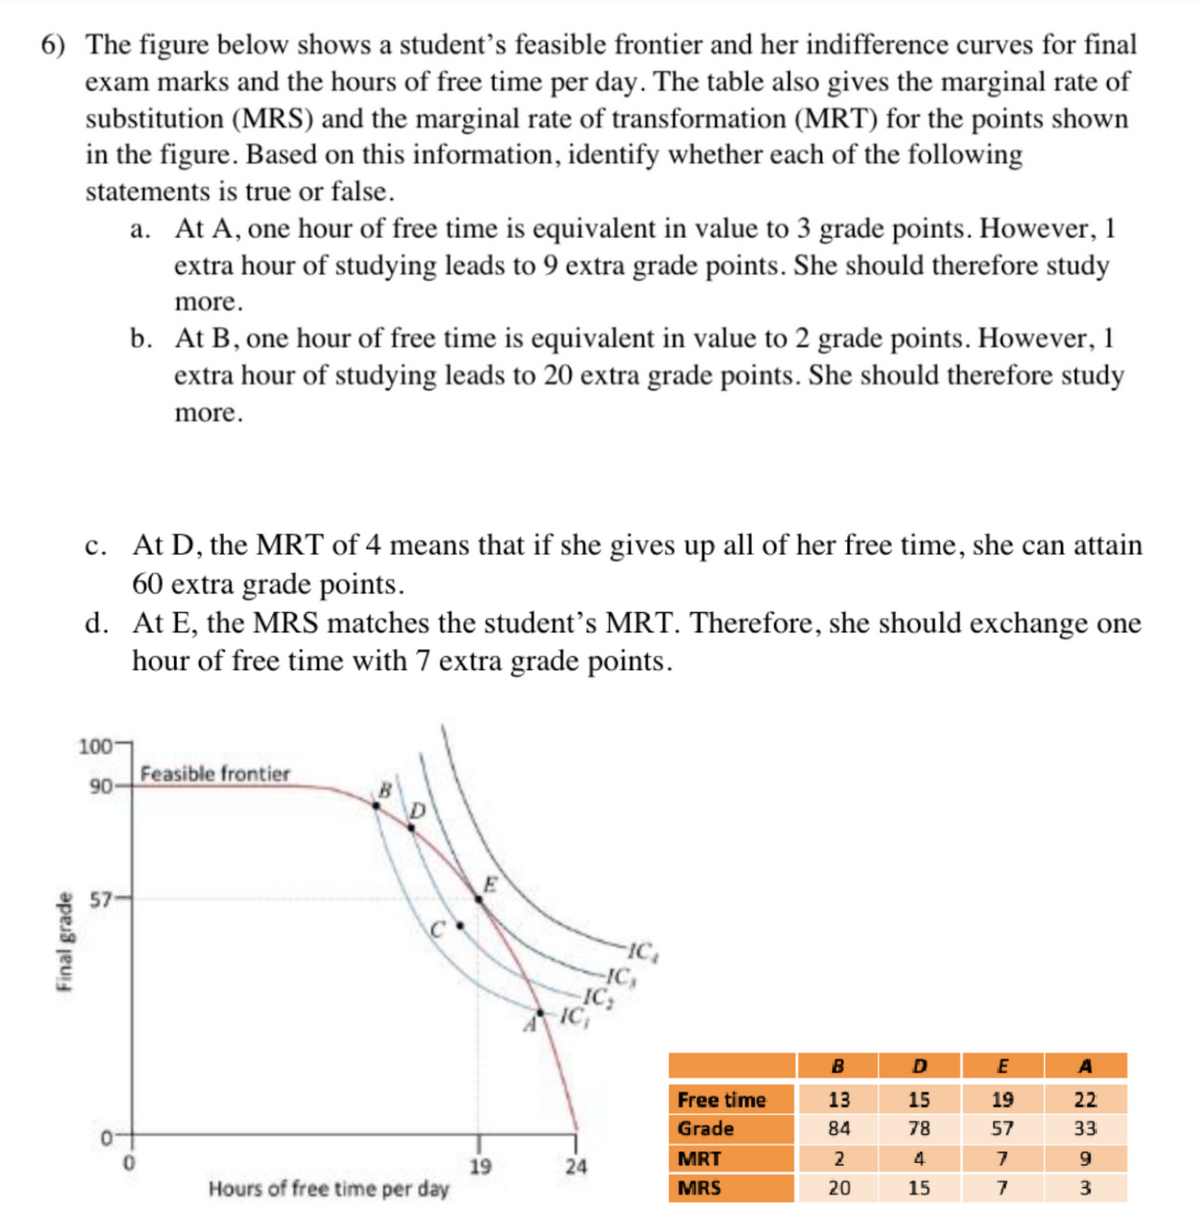 6) The figure below shows a student's feasible frontier and her indifference curves for final
exam marks and the hours of free time per day. The table also gives the marginal rate of
substitution (MRS) and the marginal rate of transformation (MRT) for the points shown
in the figure. Based on this information, identify whether each of the following
statements is true or false.
Final grade
100
c.
At D, the MRT of 4 means that if she gives up all of her free time, she can attain
60 extra grade points.
d.
At E, the MRS matches the student's MRT. Therefore, she should exchange one
hour of free time with 7 extra grade points.
90-
a. At A, one hour of free time is equivalent in value to 3 grade points. However, 1
extra hour of studying leads to 9 extra grade points. She should therefore study
more.
0
b. At B, one hour of free time is equivalent in value to 2 grade points. However, 1
extra hour of studying leads to 20 extra grade points. She should therefore study
more.
0
Feasible frontier
Hours of free time per day
19
IC
AIC
24
IC,
Free time
Grade
MRT
MRS
B
13
84
2
20
D
15
78
4
15
E
19
57
7
7
A
22
33
9
3